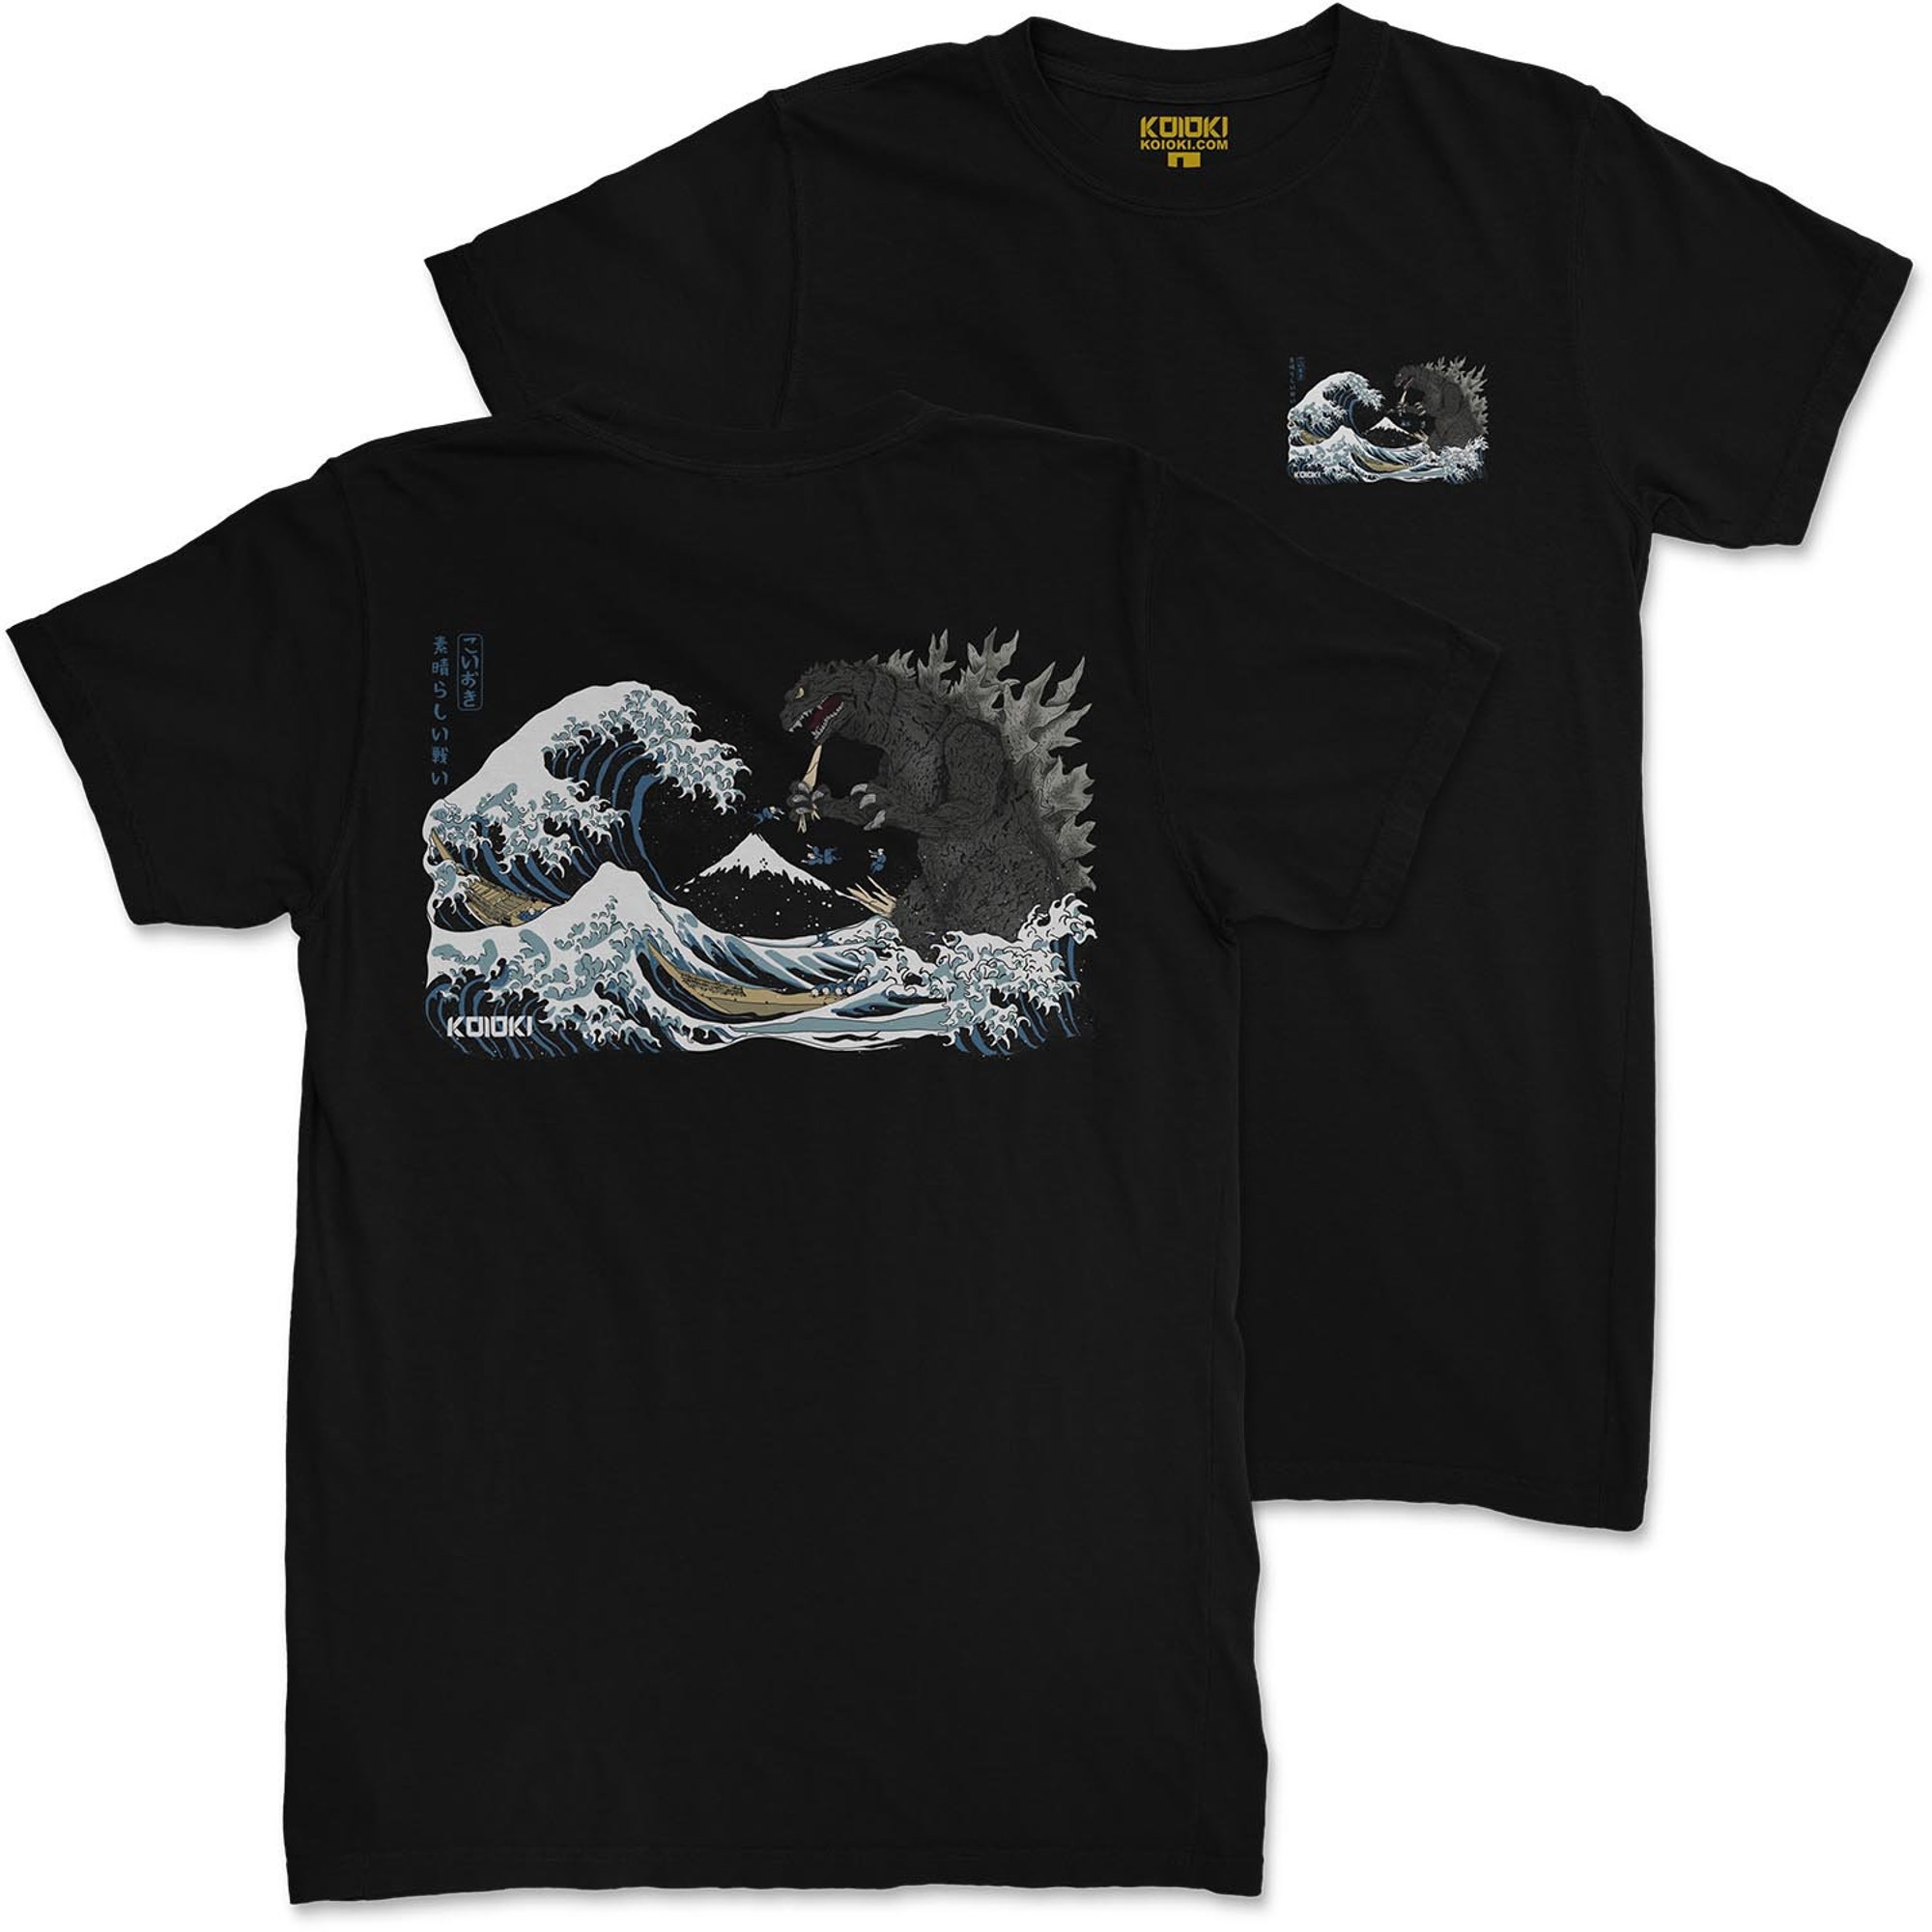 Discover The Great Battle - The Great Wave off Kanagawa T-shirt